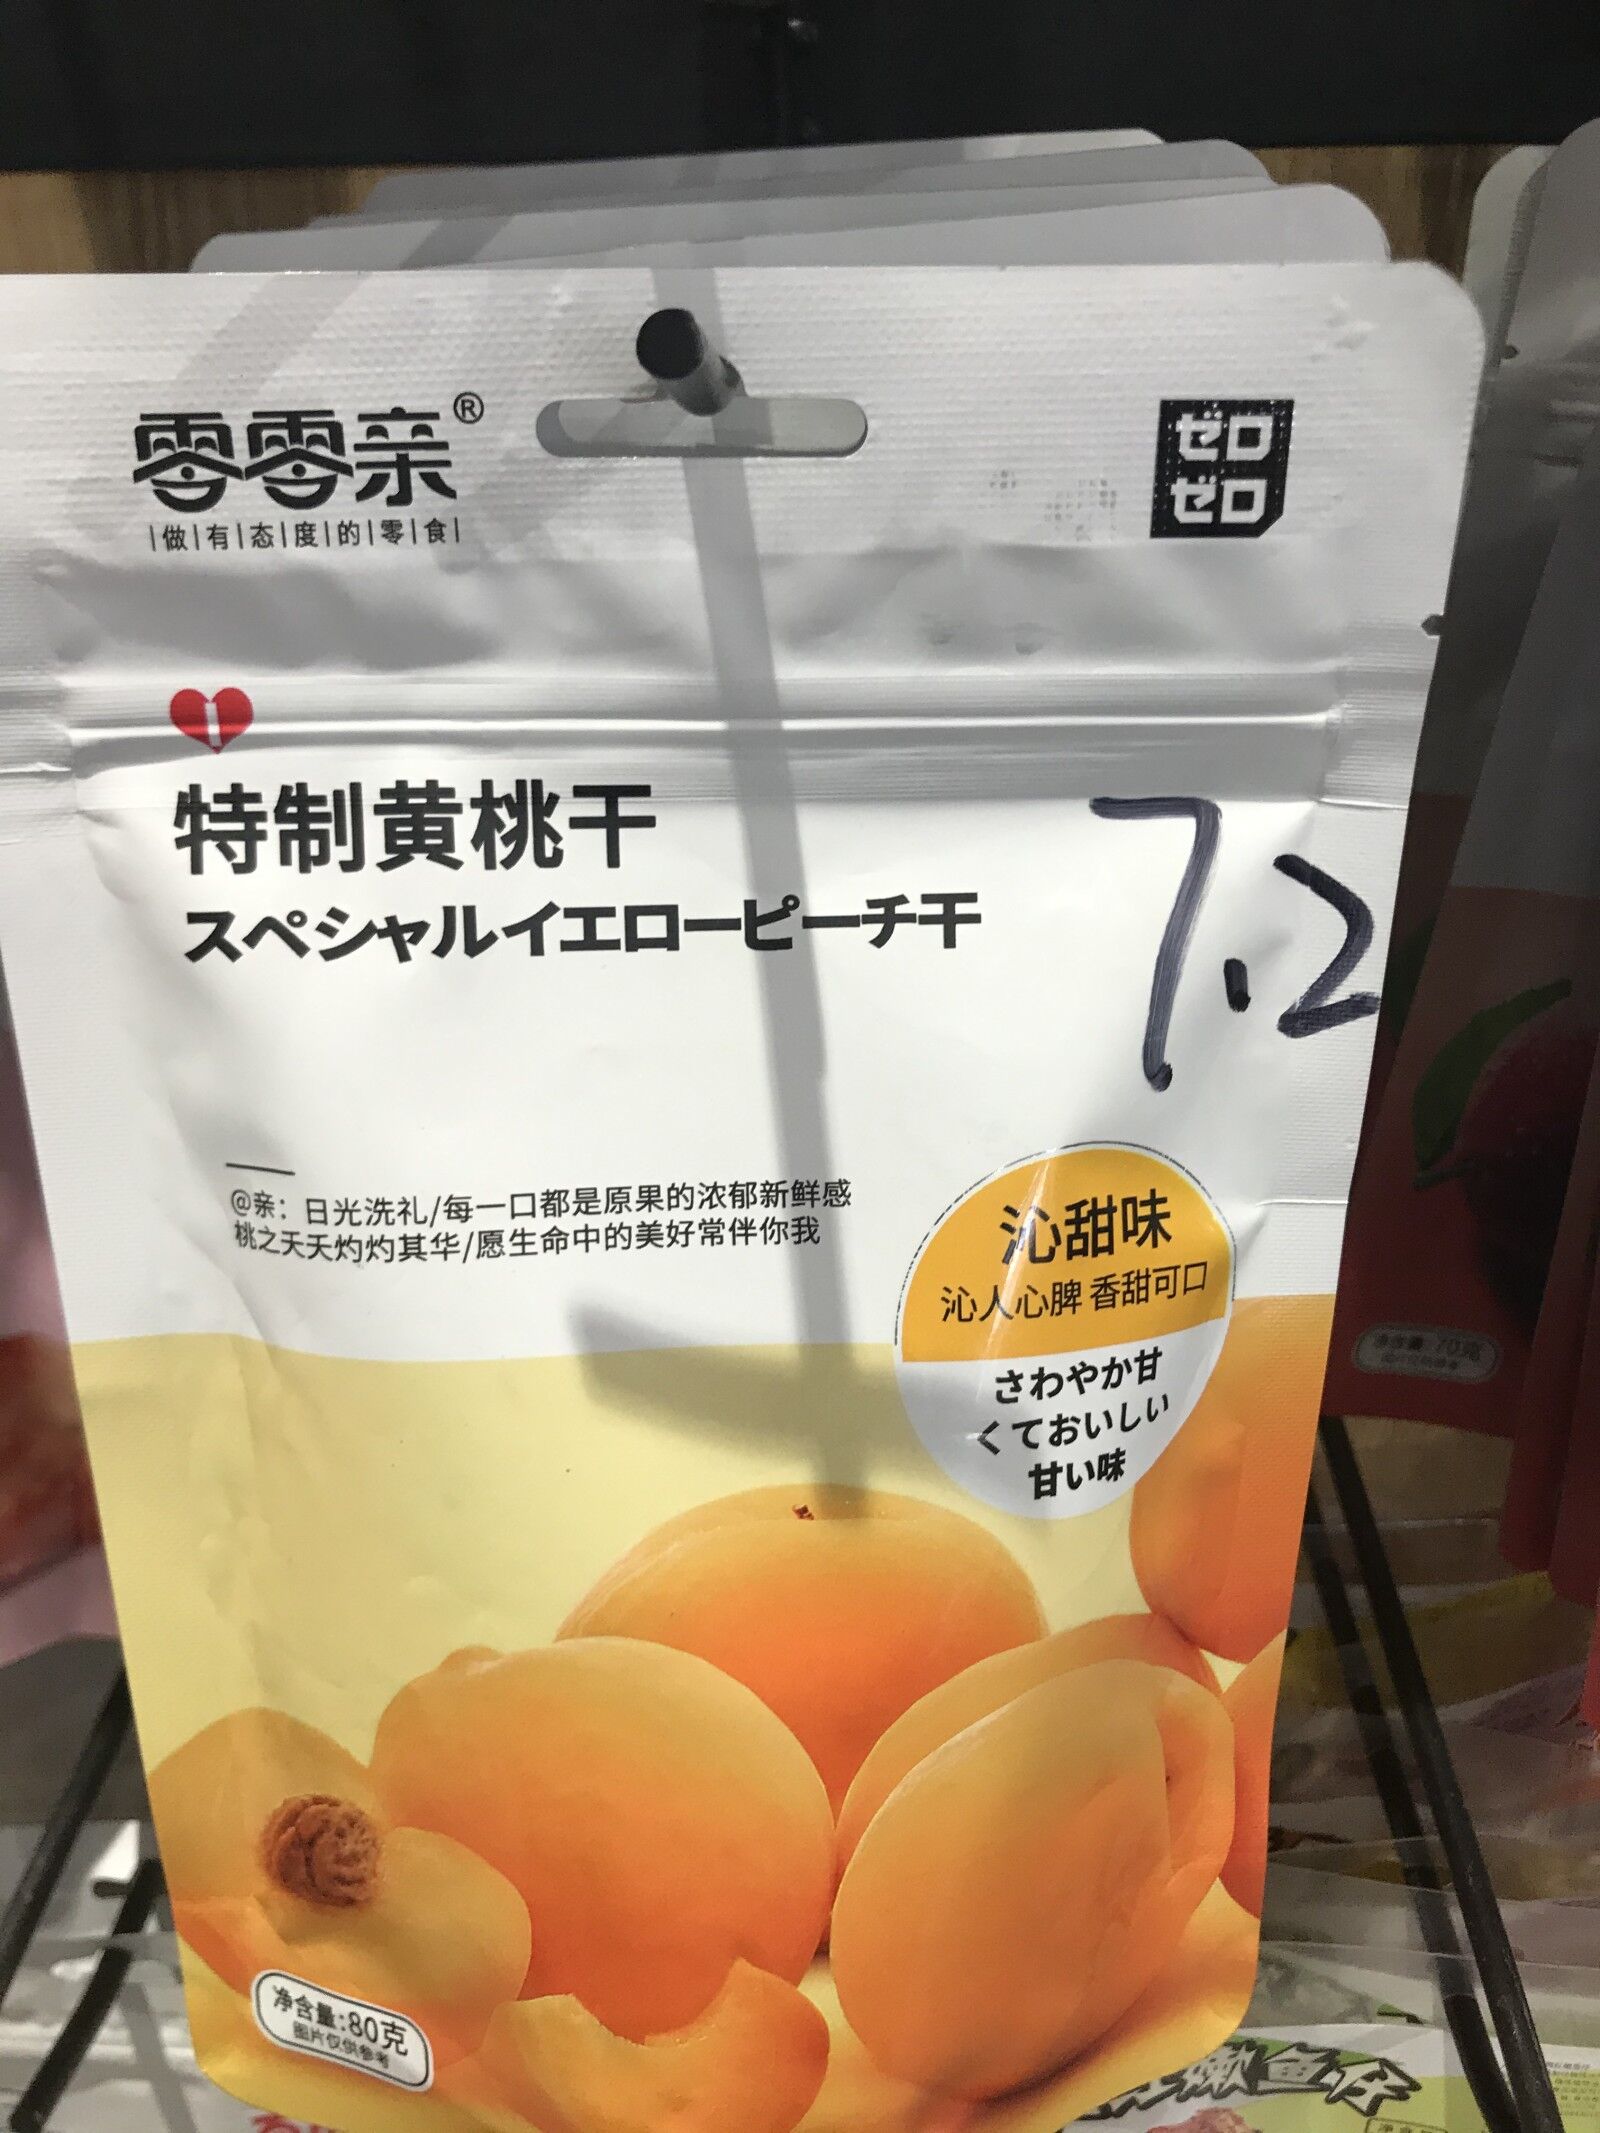 050 fruits: Dried yellow peaches